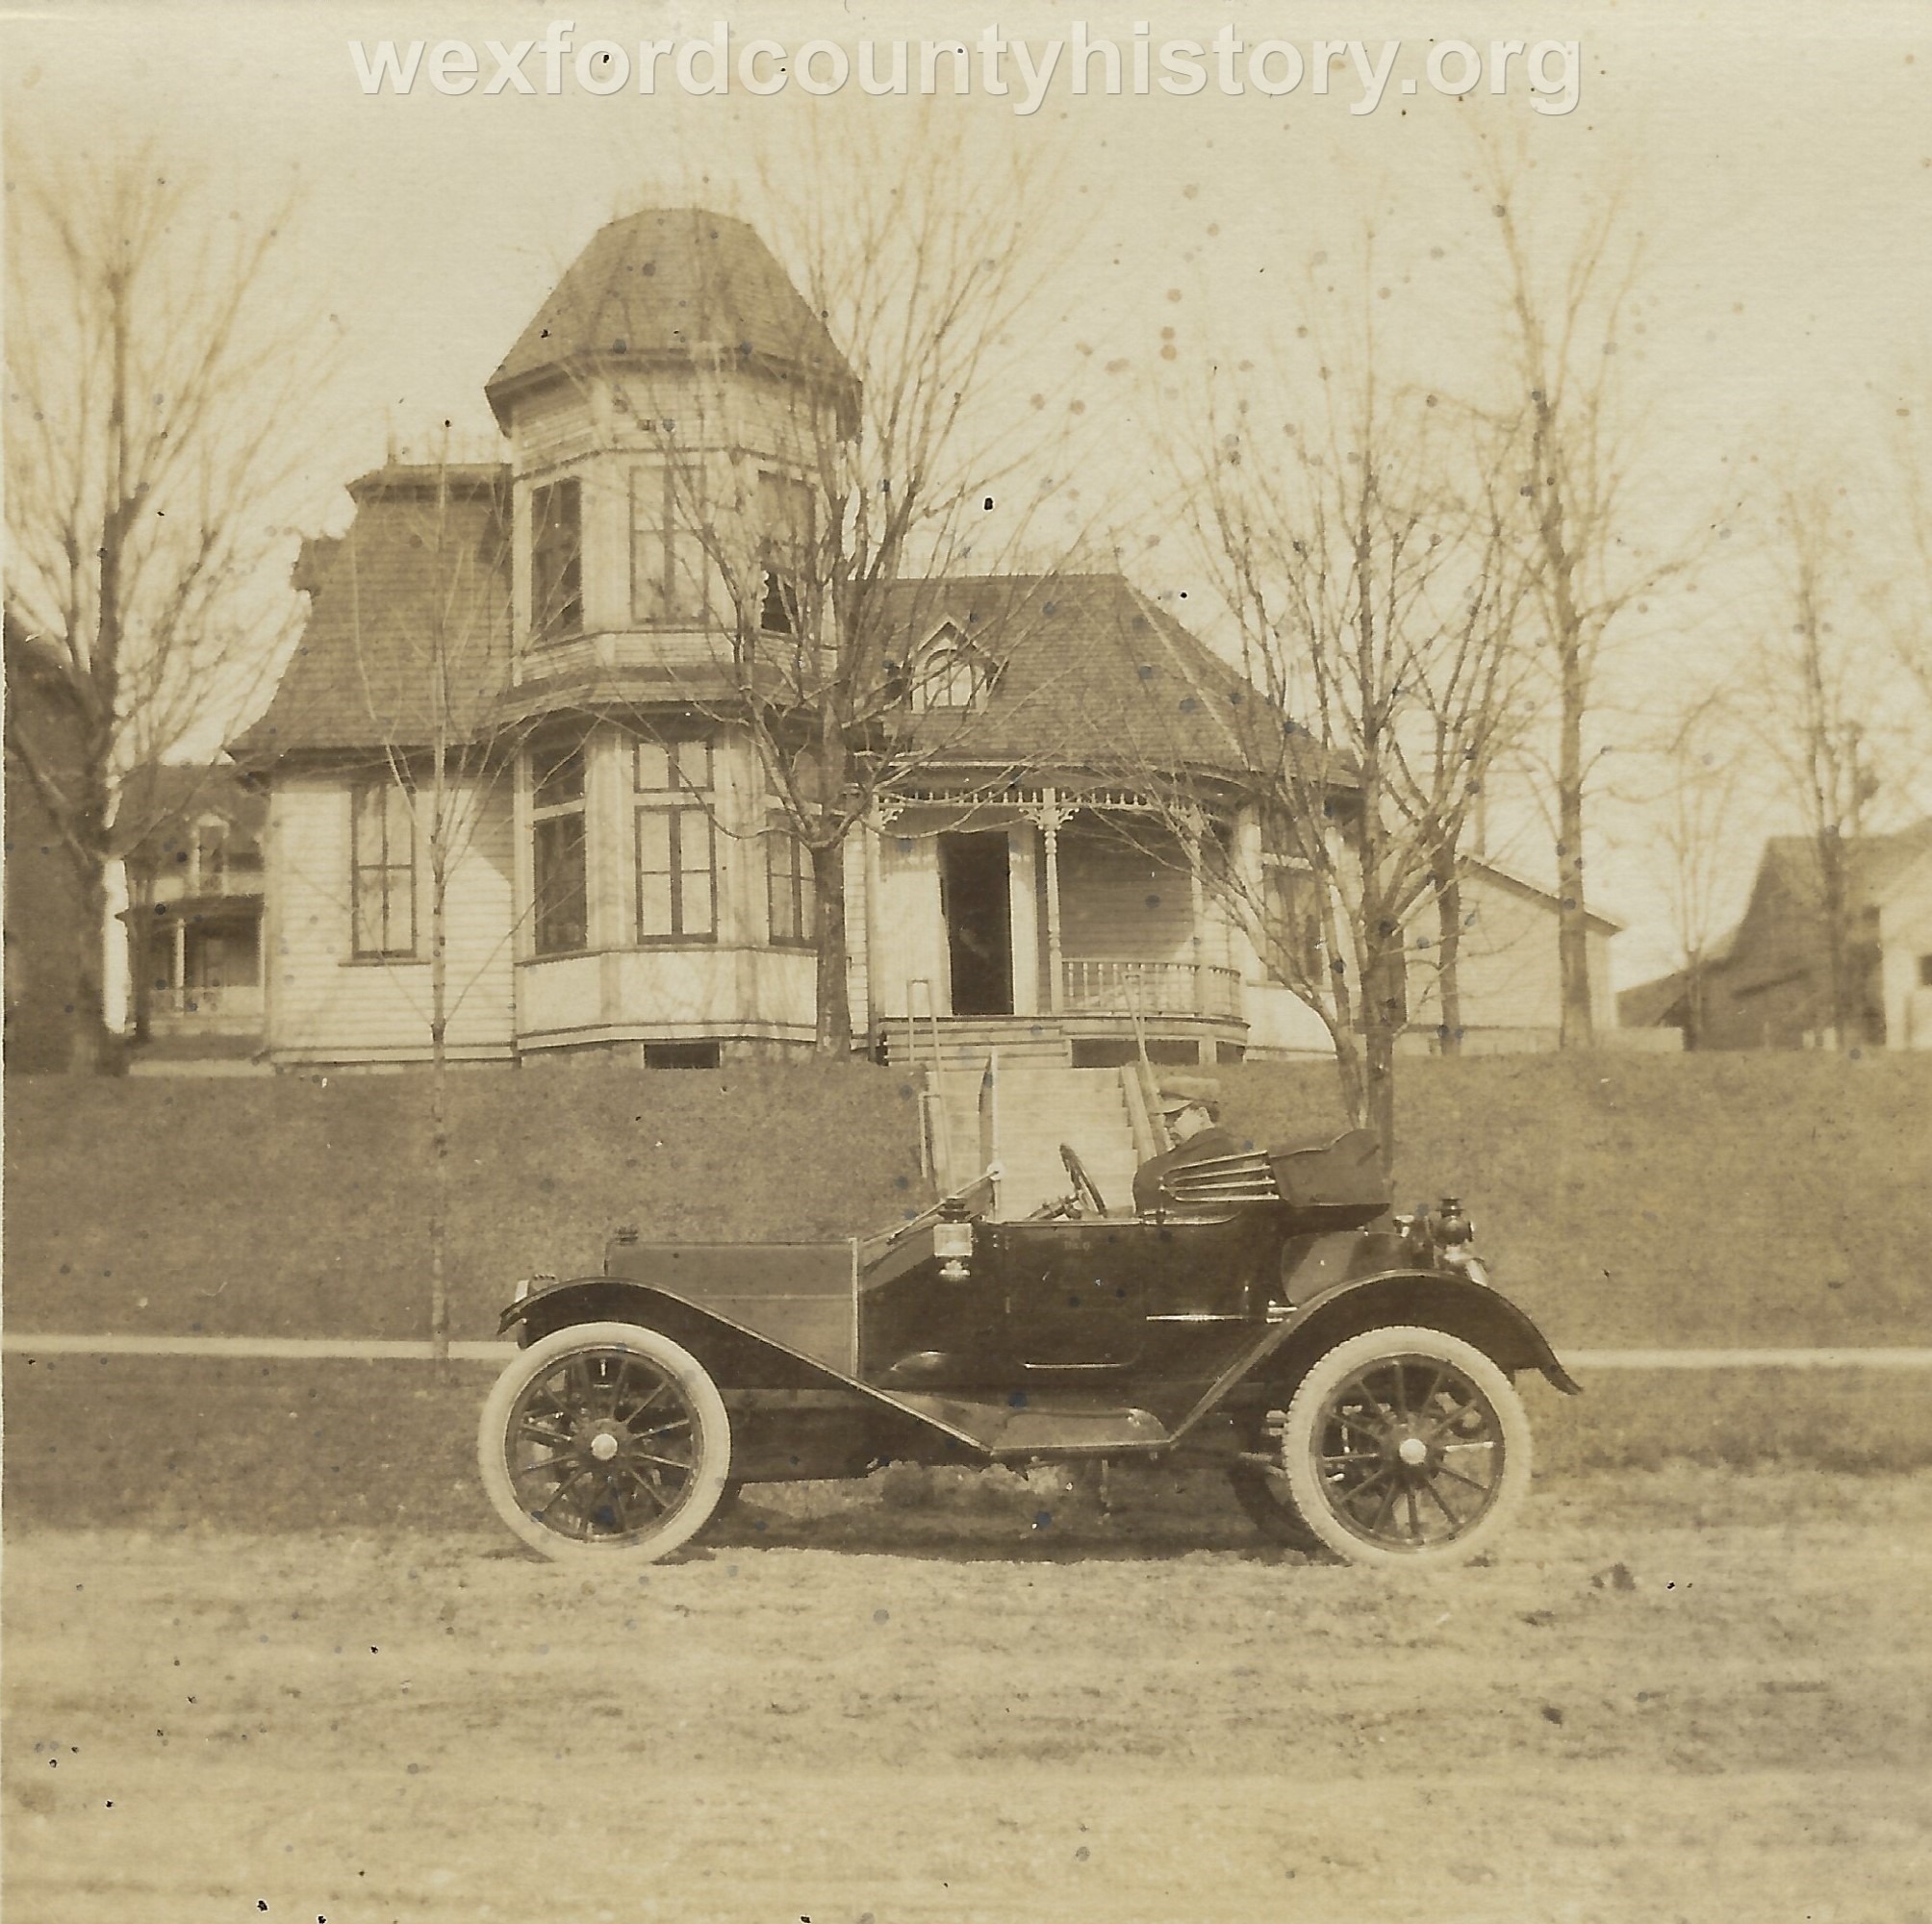 Car In Front Of Dr. Oden's house, c. 1910 - 1920